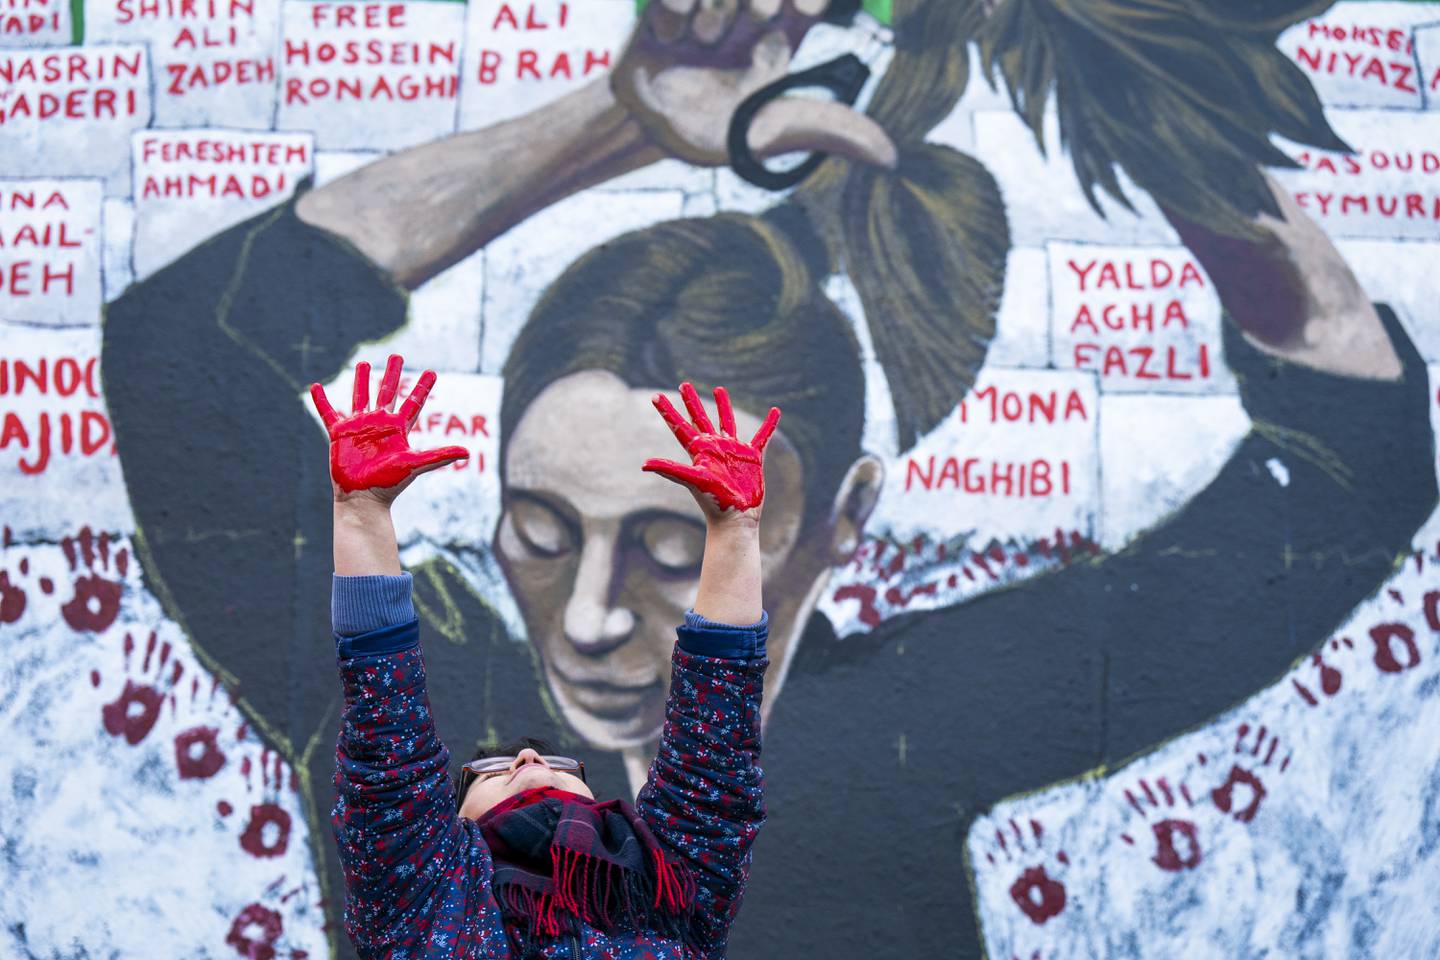 An Iranian woman helps to create the Women Life Freedom mural in Edinburgh, Scotland. Members of the public are being invited to add their hand-print to the artwork to help raise awareness about the uprising in Iran. PA